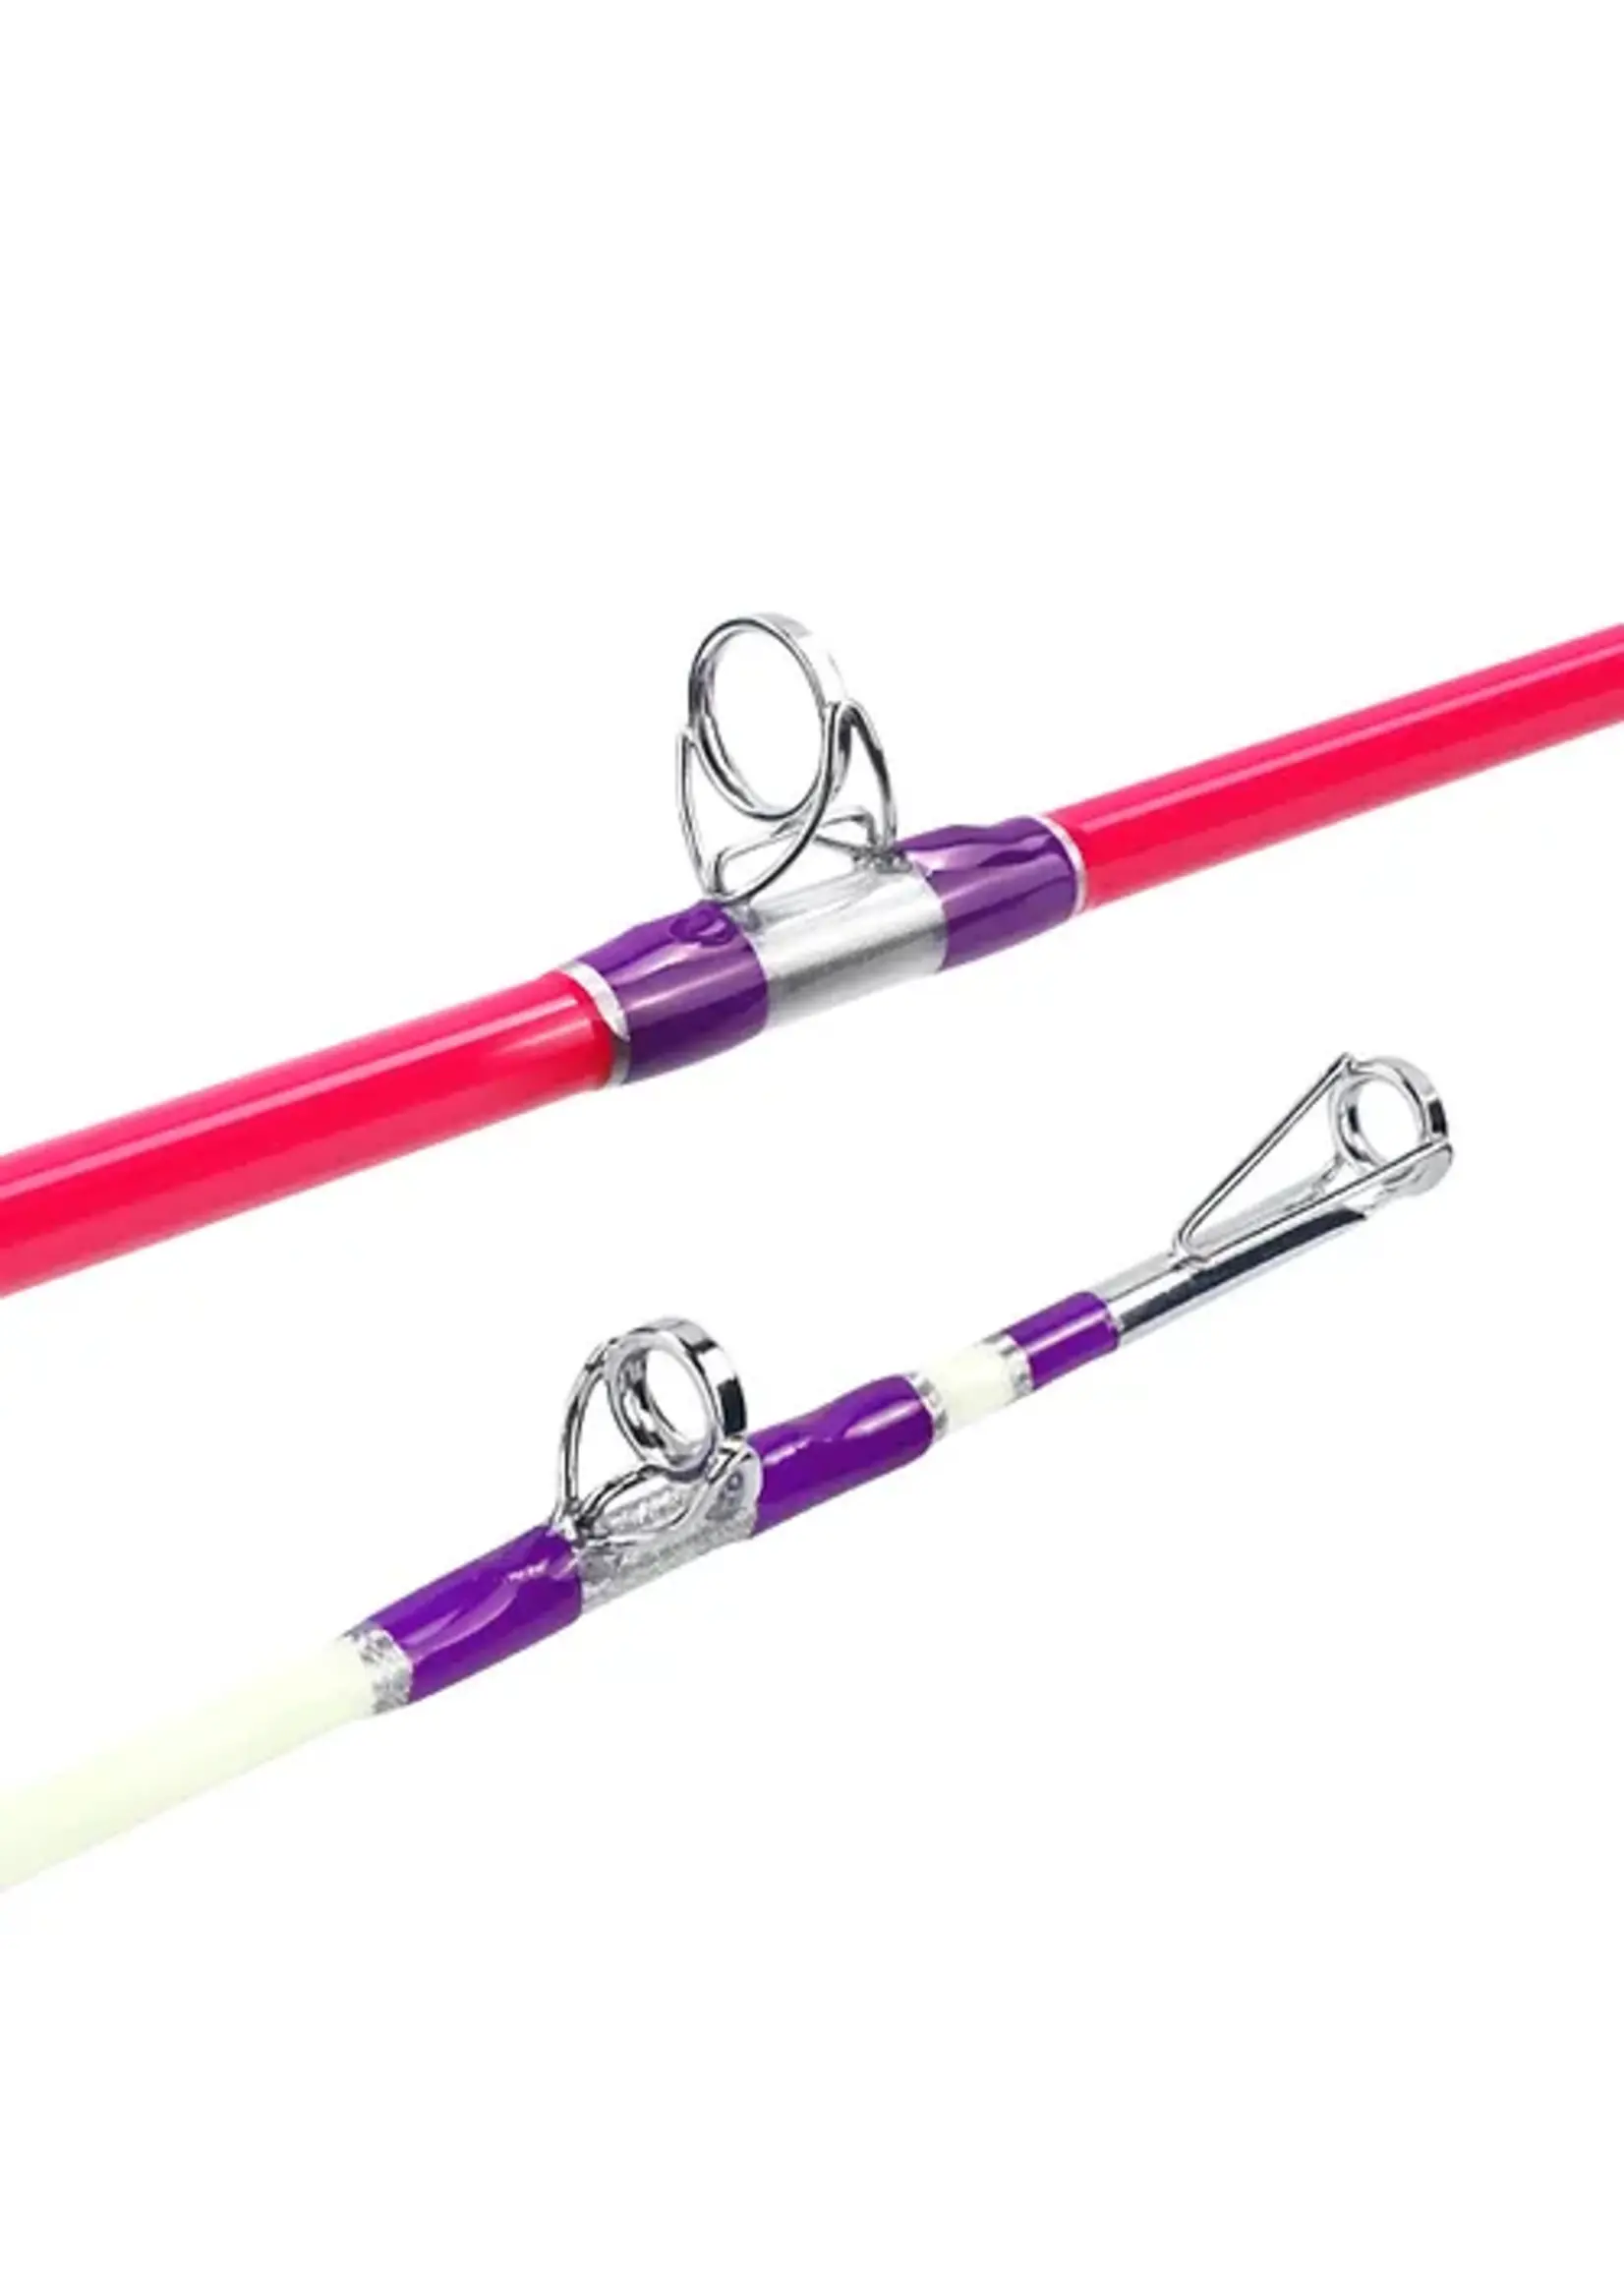 Mad Katz Rods are in stock! 🎉 New Colors 🎉 TackleBandit.com #tackleb